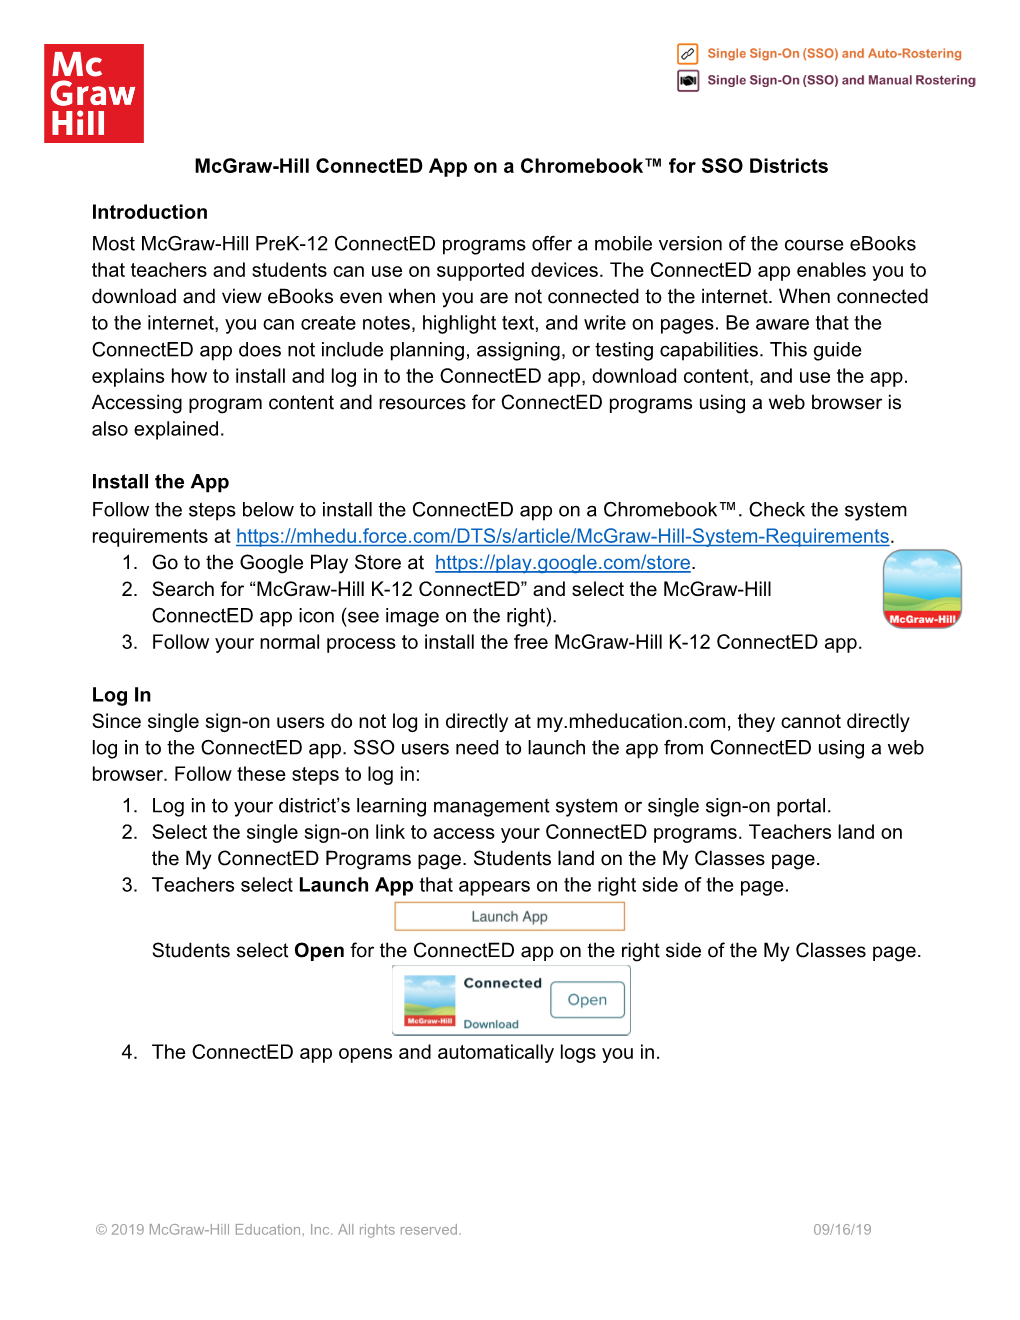 Mcgraw-Hill Connected App on a Chromebook™ for SSO Districts